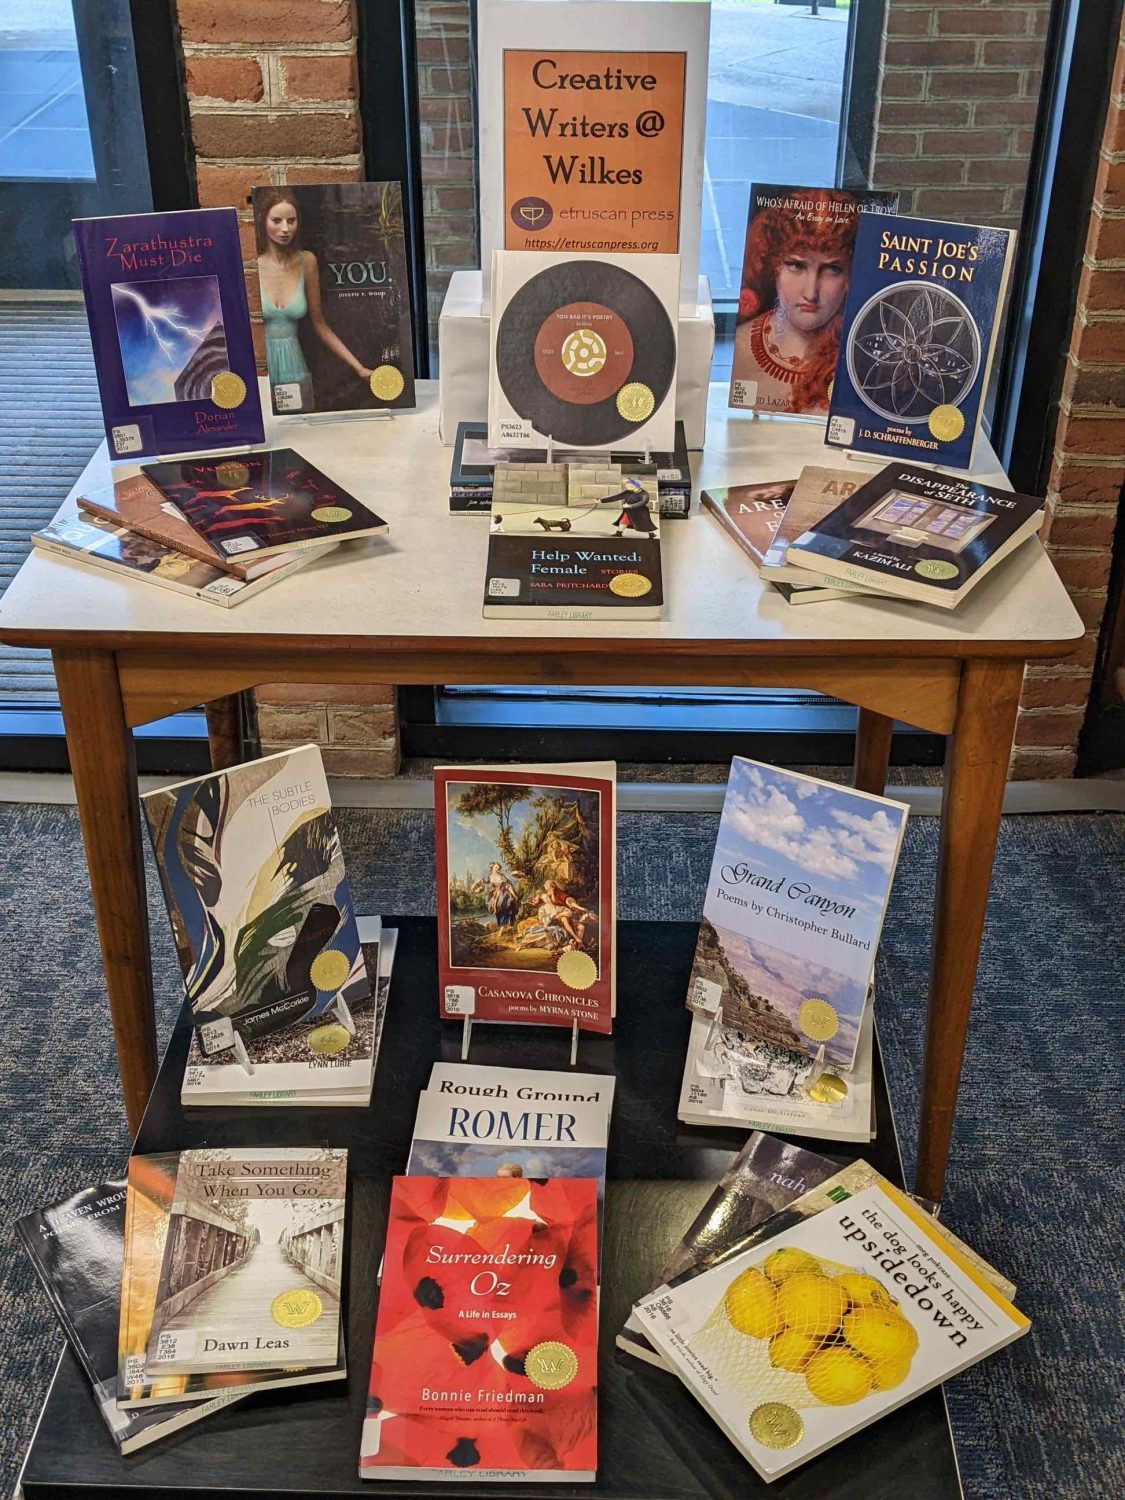 library display of books written by creative writing faculty and students